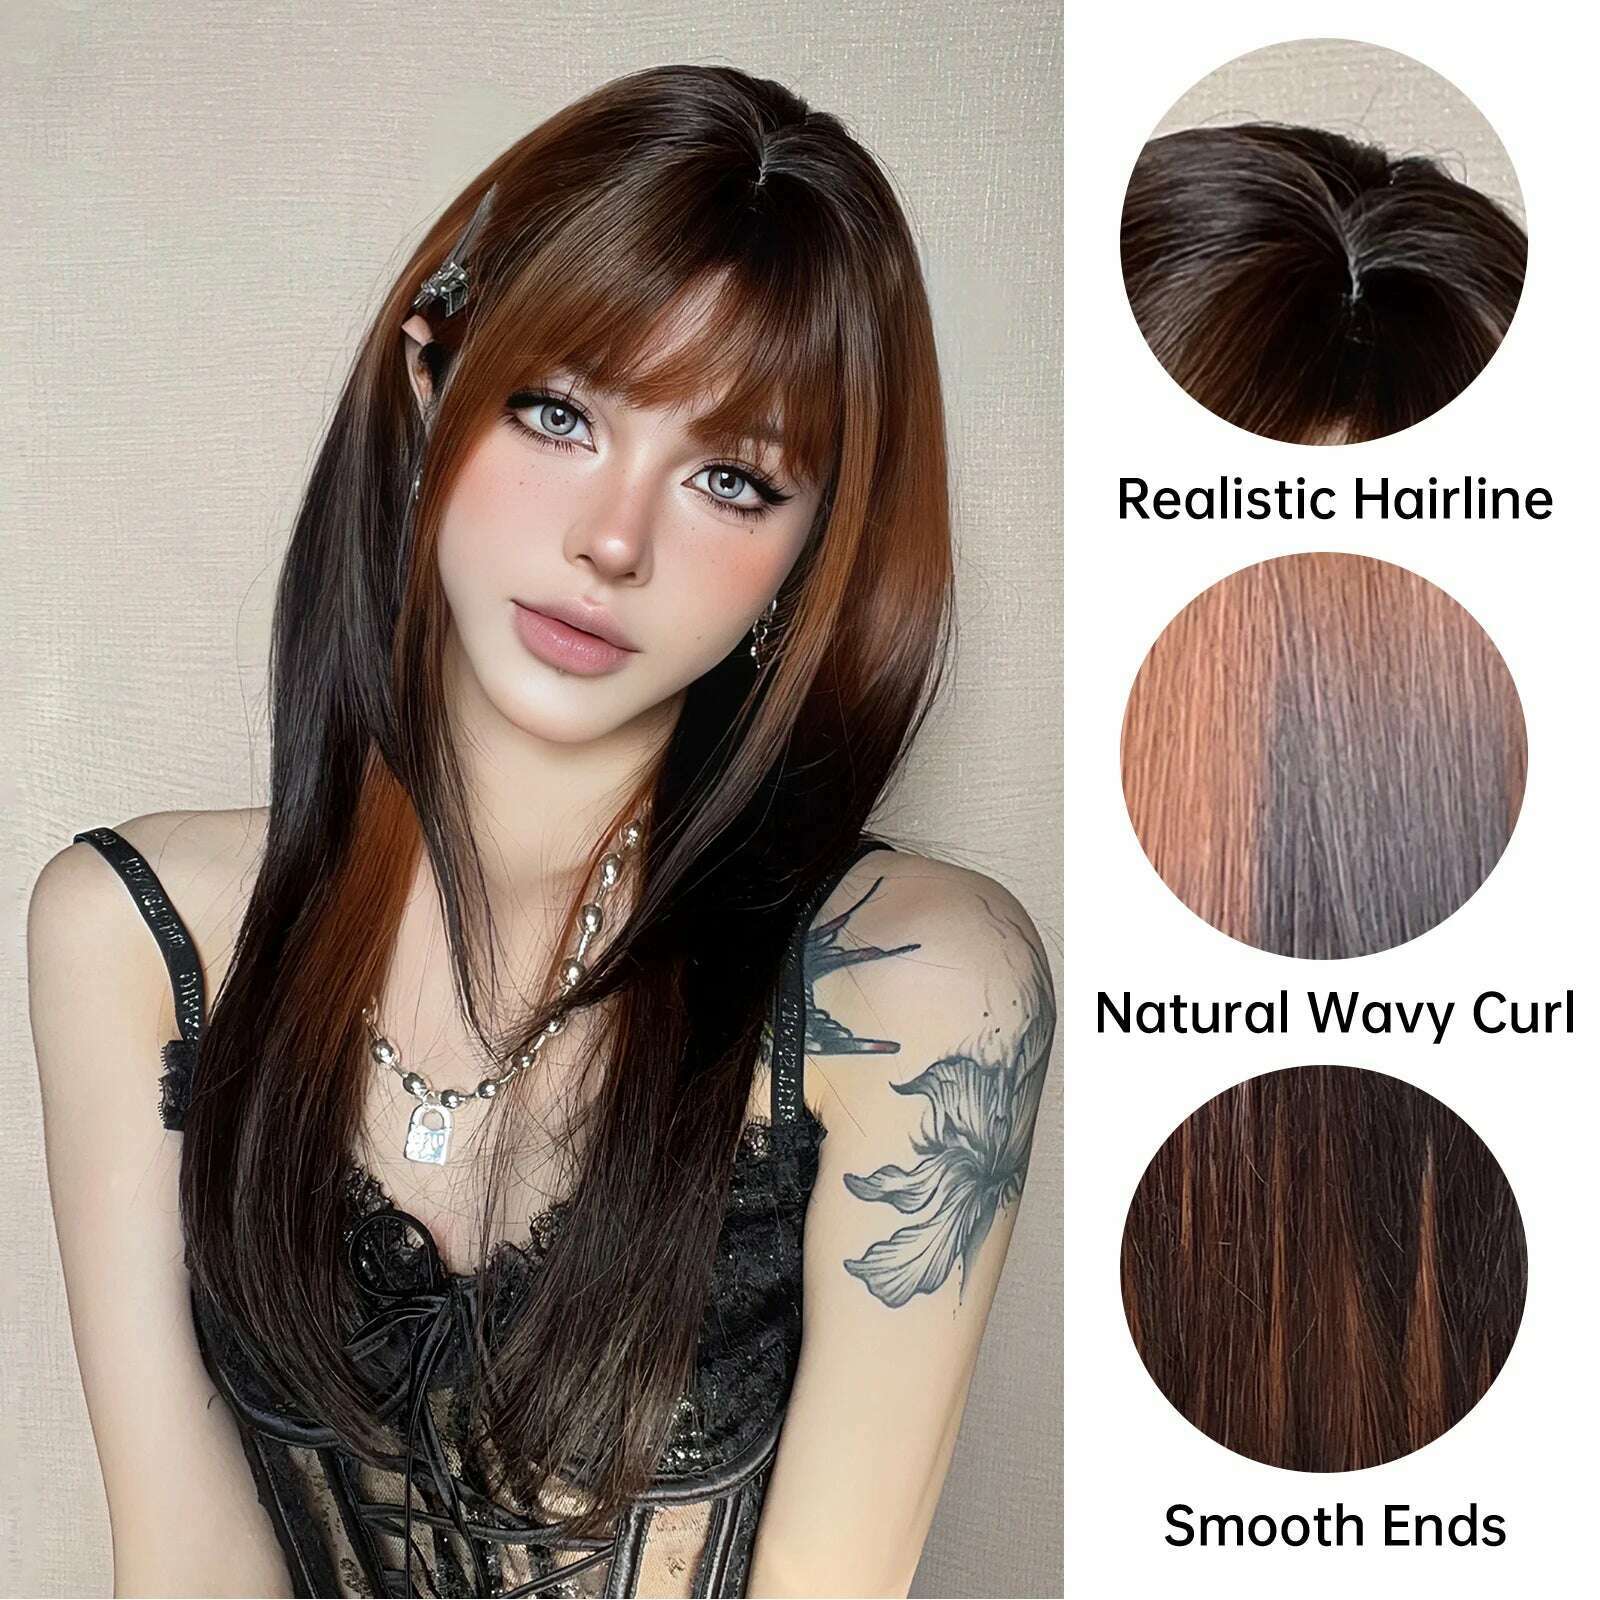 KIMLUD, Long Straight Ginger Ombre Brown Black Synthetic Wigs Cosplay Wig with Bang for Women Afro Party Lolita Use Heat Resistant Fibre, KIMLUD Womens Clothes